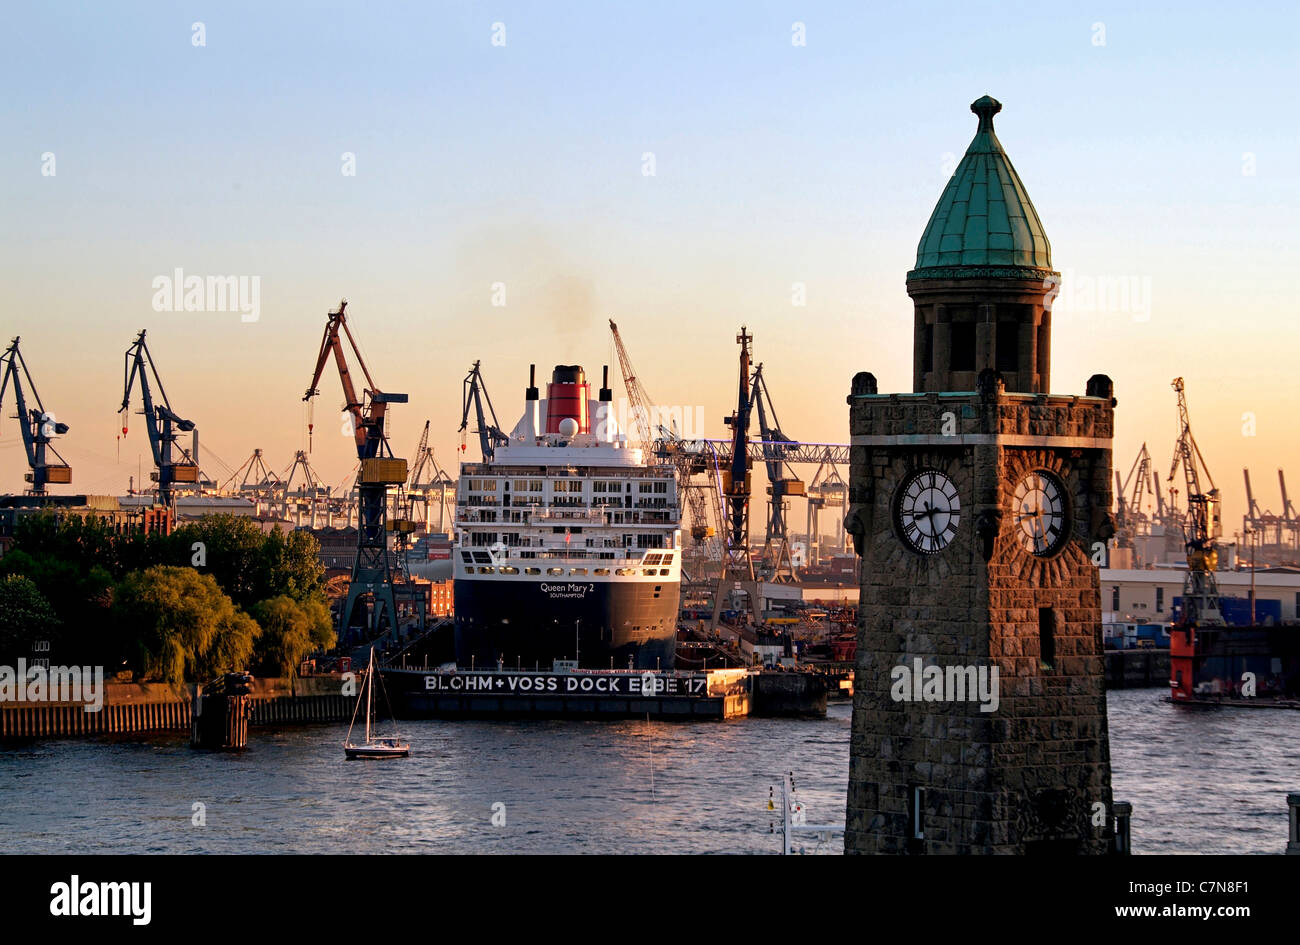 Silhouette of the Landungsbruecken with passenger cruise ship Queen Mary 2 in the shipyards, Hamburg, Germany Stock Photo